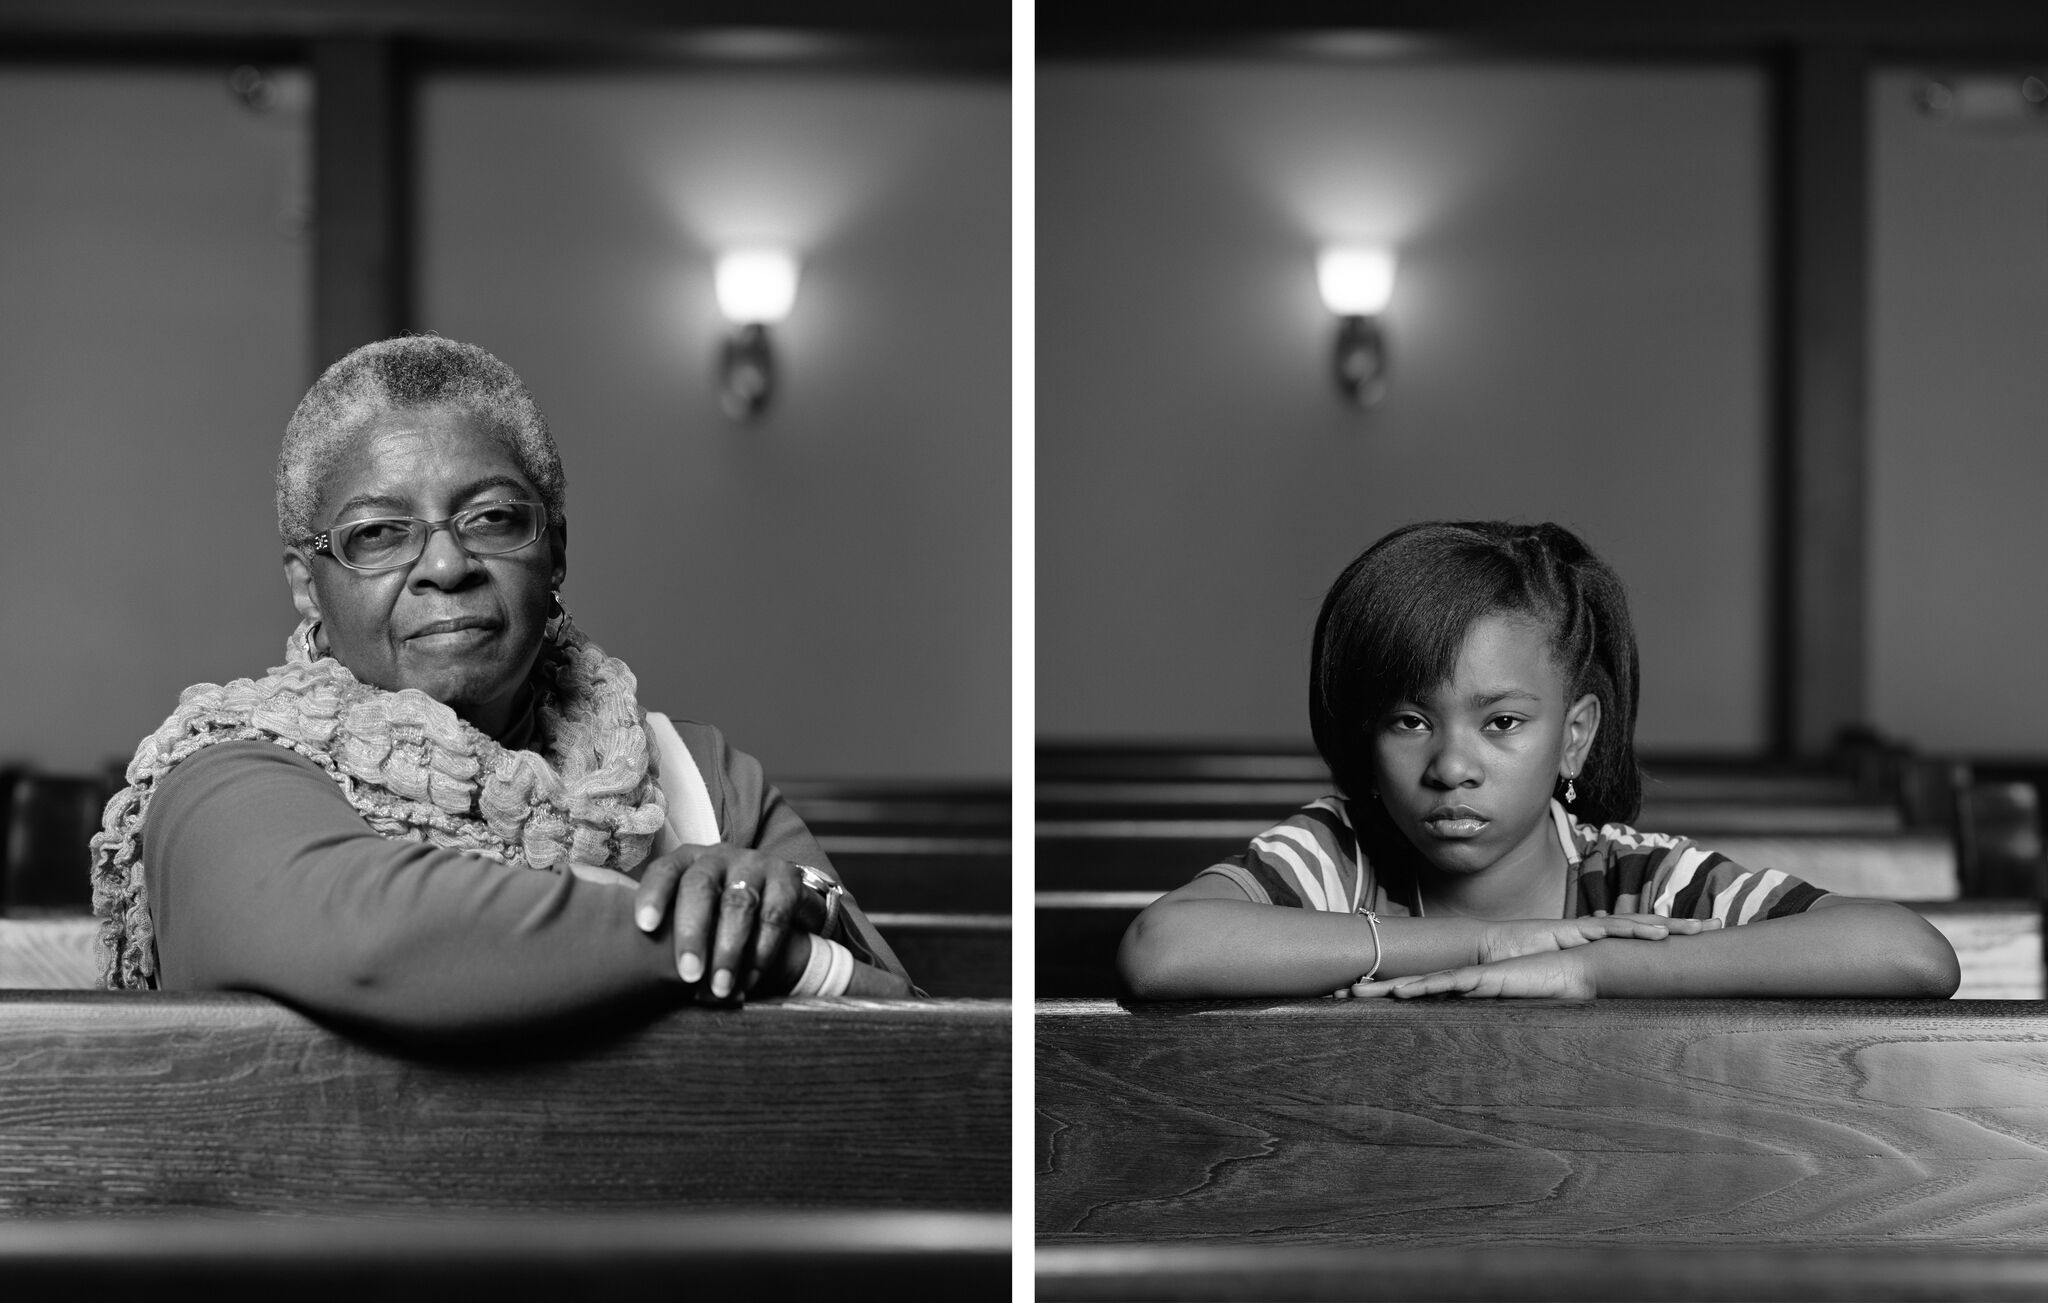 A diptych of photos each depicting a person sitting in a church pew and facing the camera.